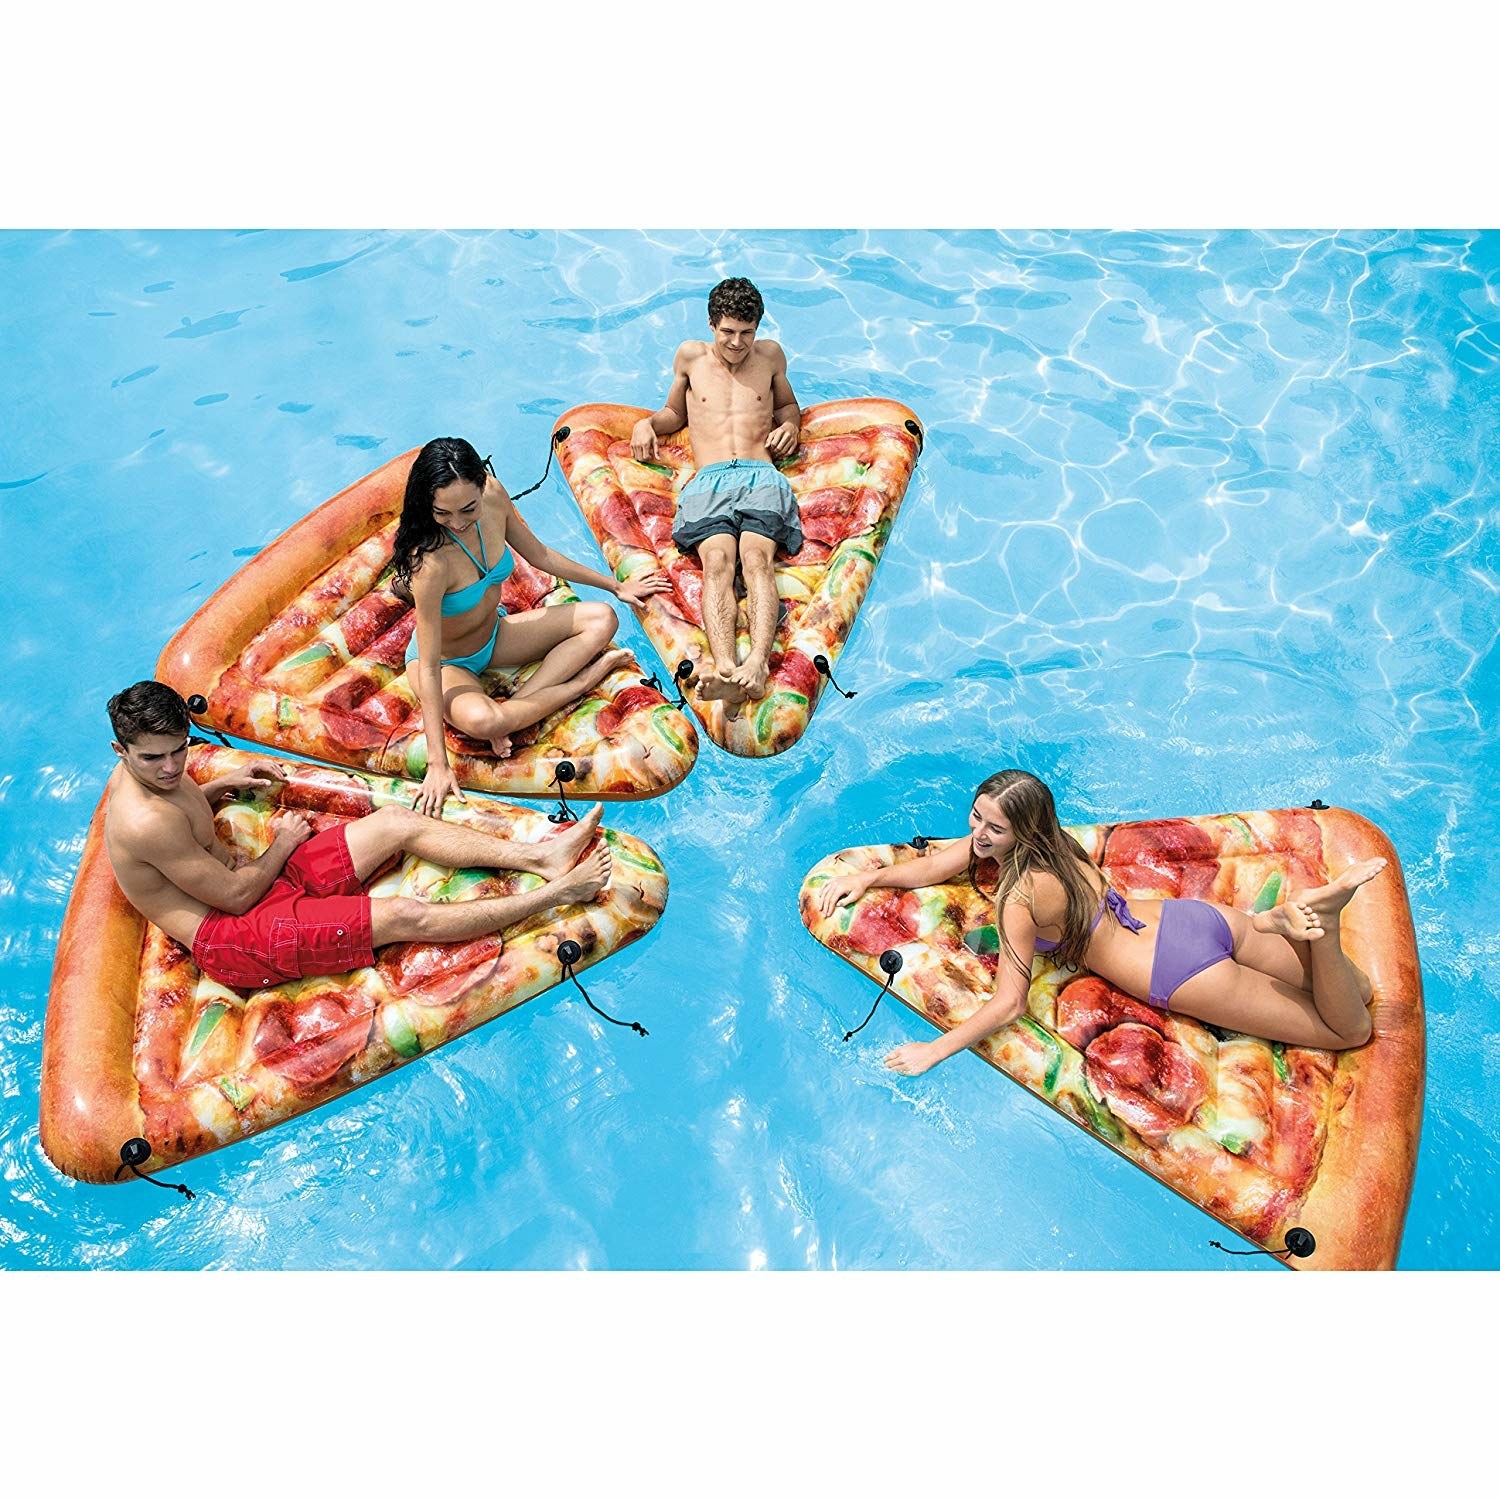 Pineapple Outdoor Swimming Pool Raft Giant Pool Lounge Summer Party Beach Holiday Toys for Adults and Kids FunsLane Inflatable Pool Float with 3 Pack Random Inflatable Drink Holders 